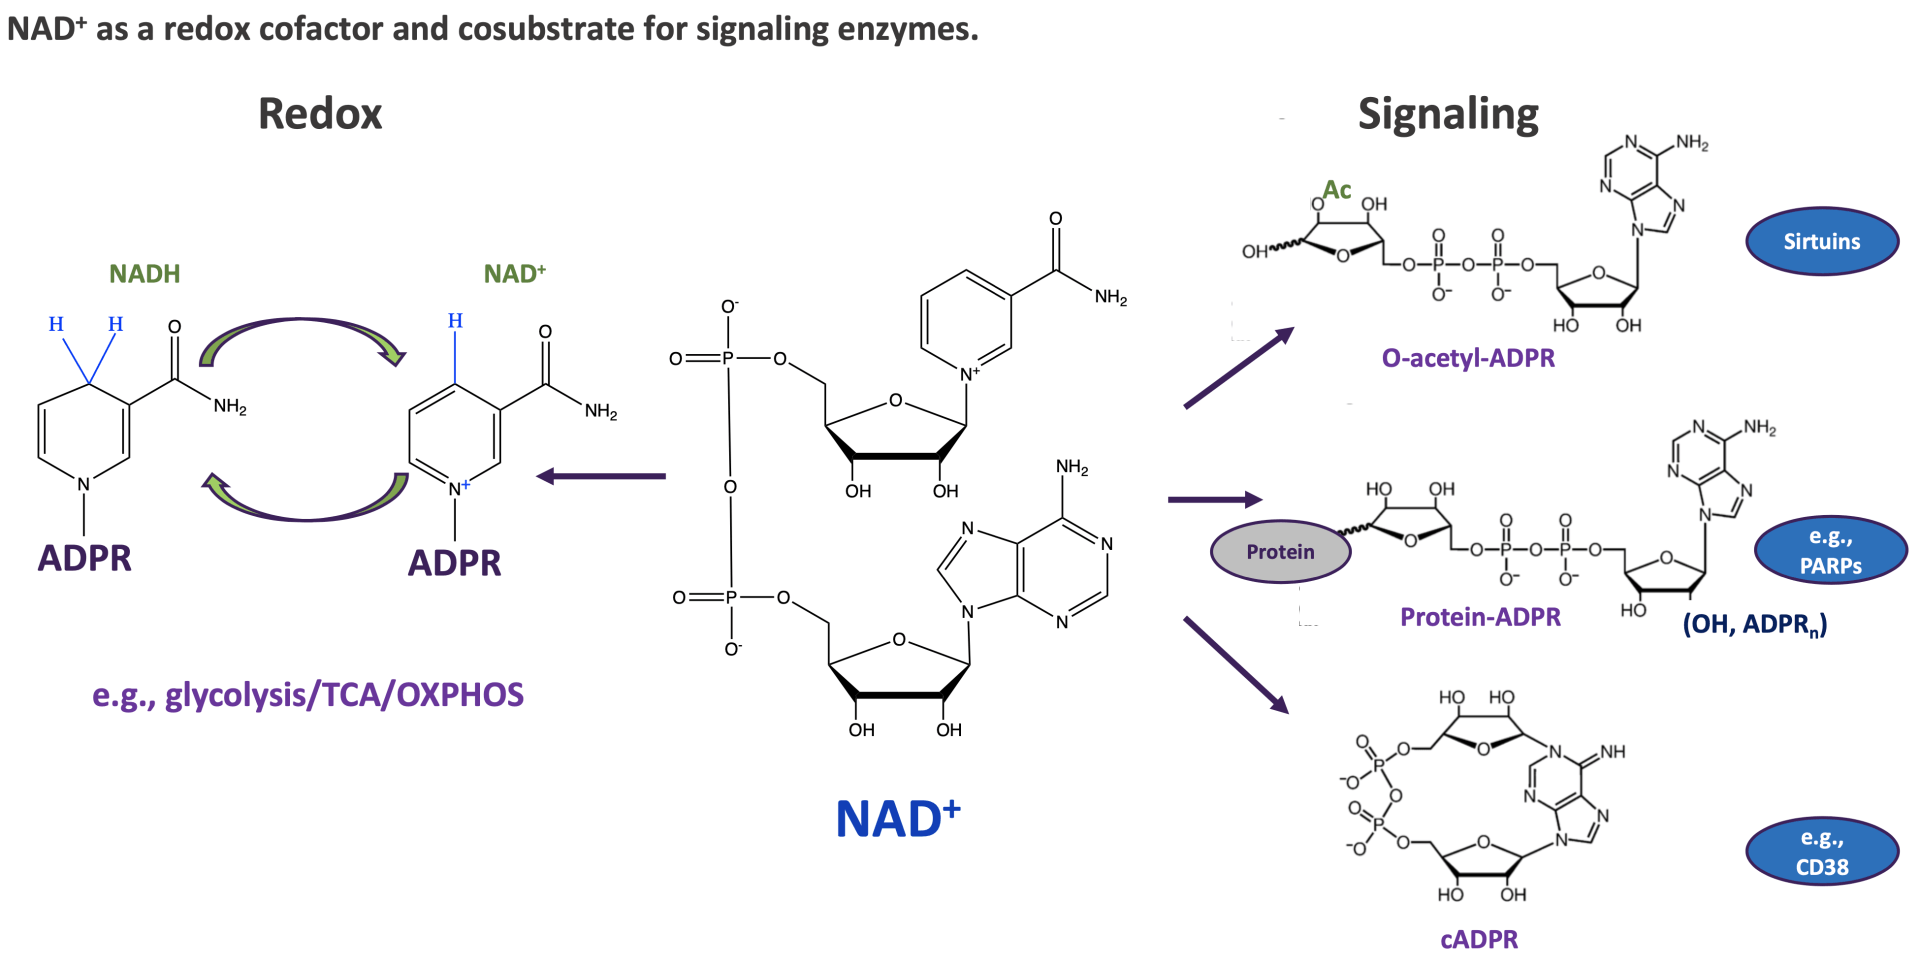 NAD+ as a redox cofactor and cosubstrate for signaling enzymes.